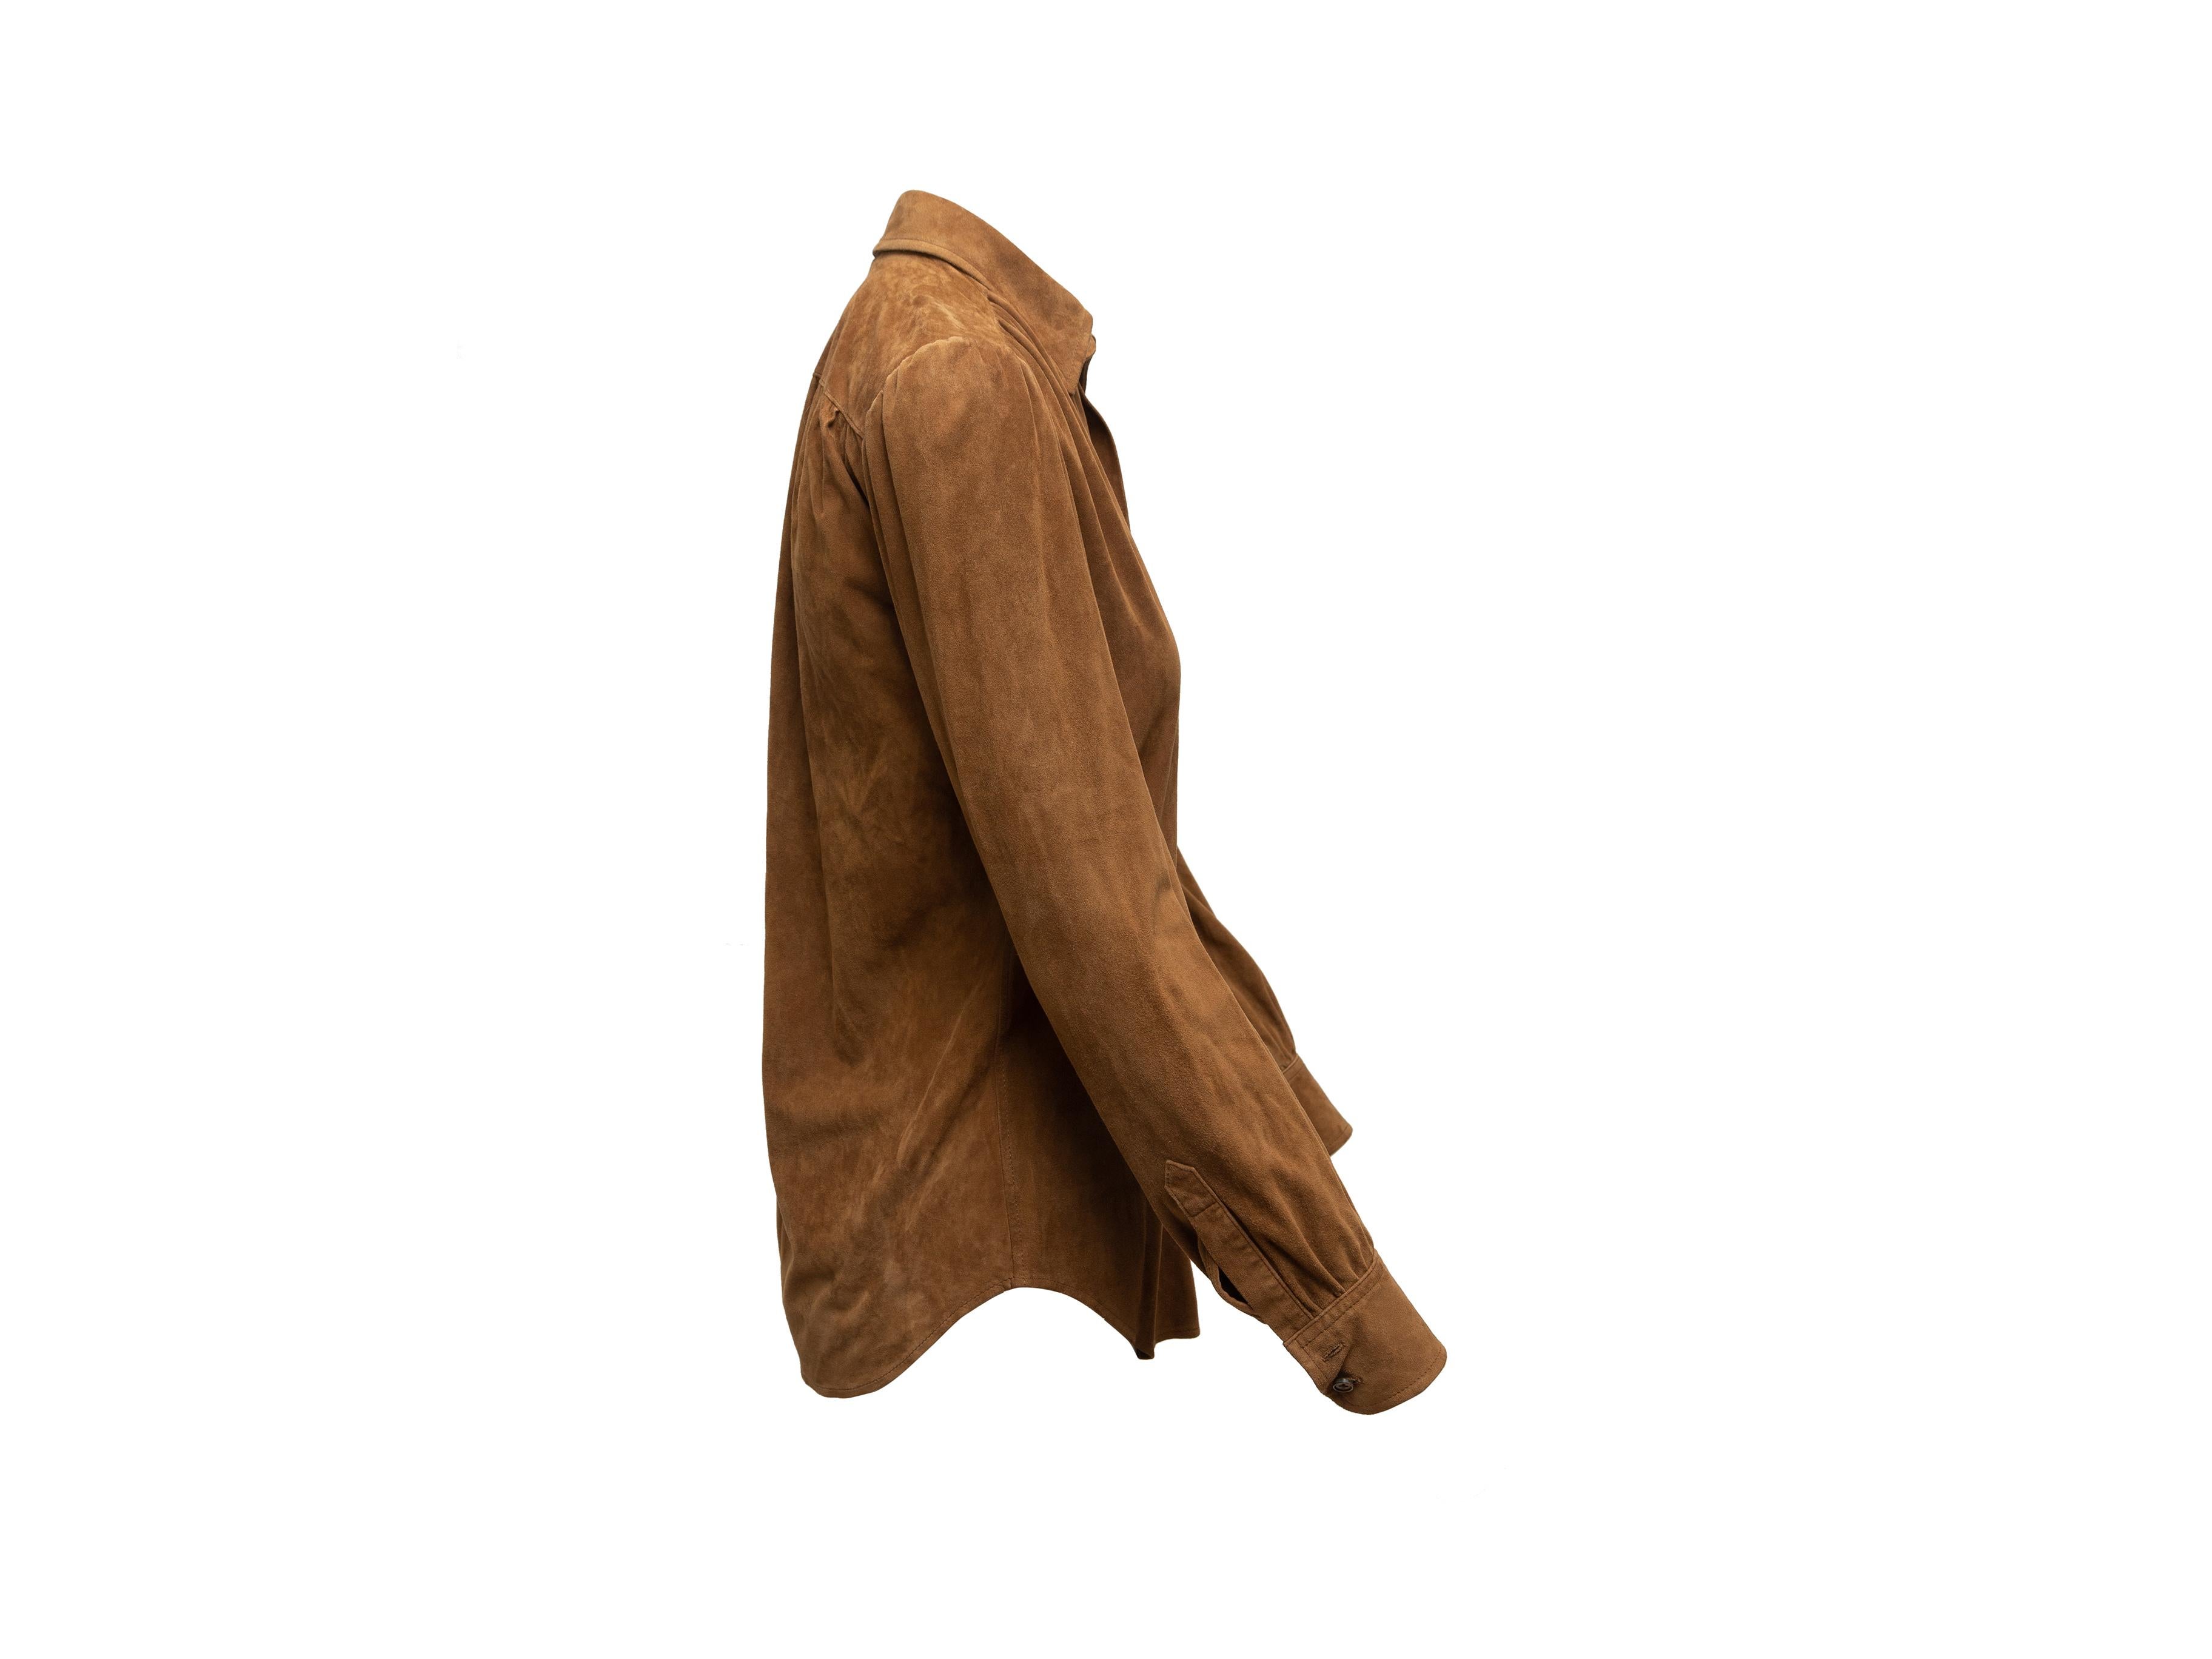 Product details: Brown suede long sleeve button-up top by Ralph Lauren. Pointed collar. Button closures at center front. 36